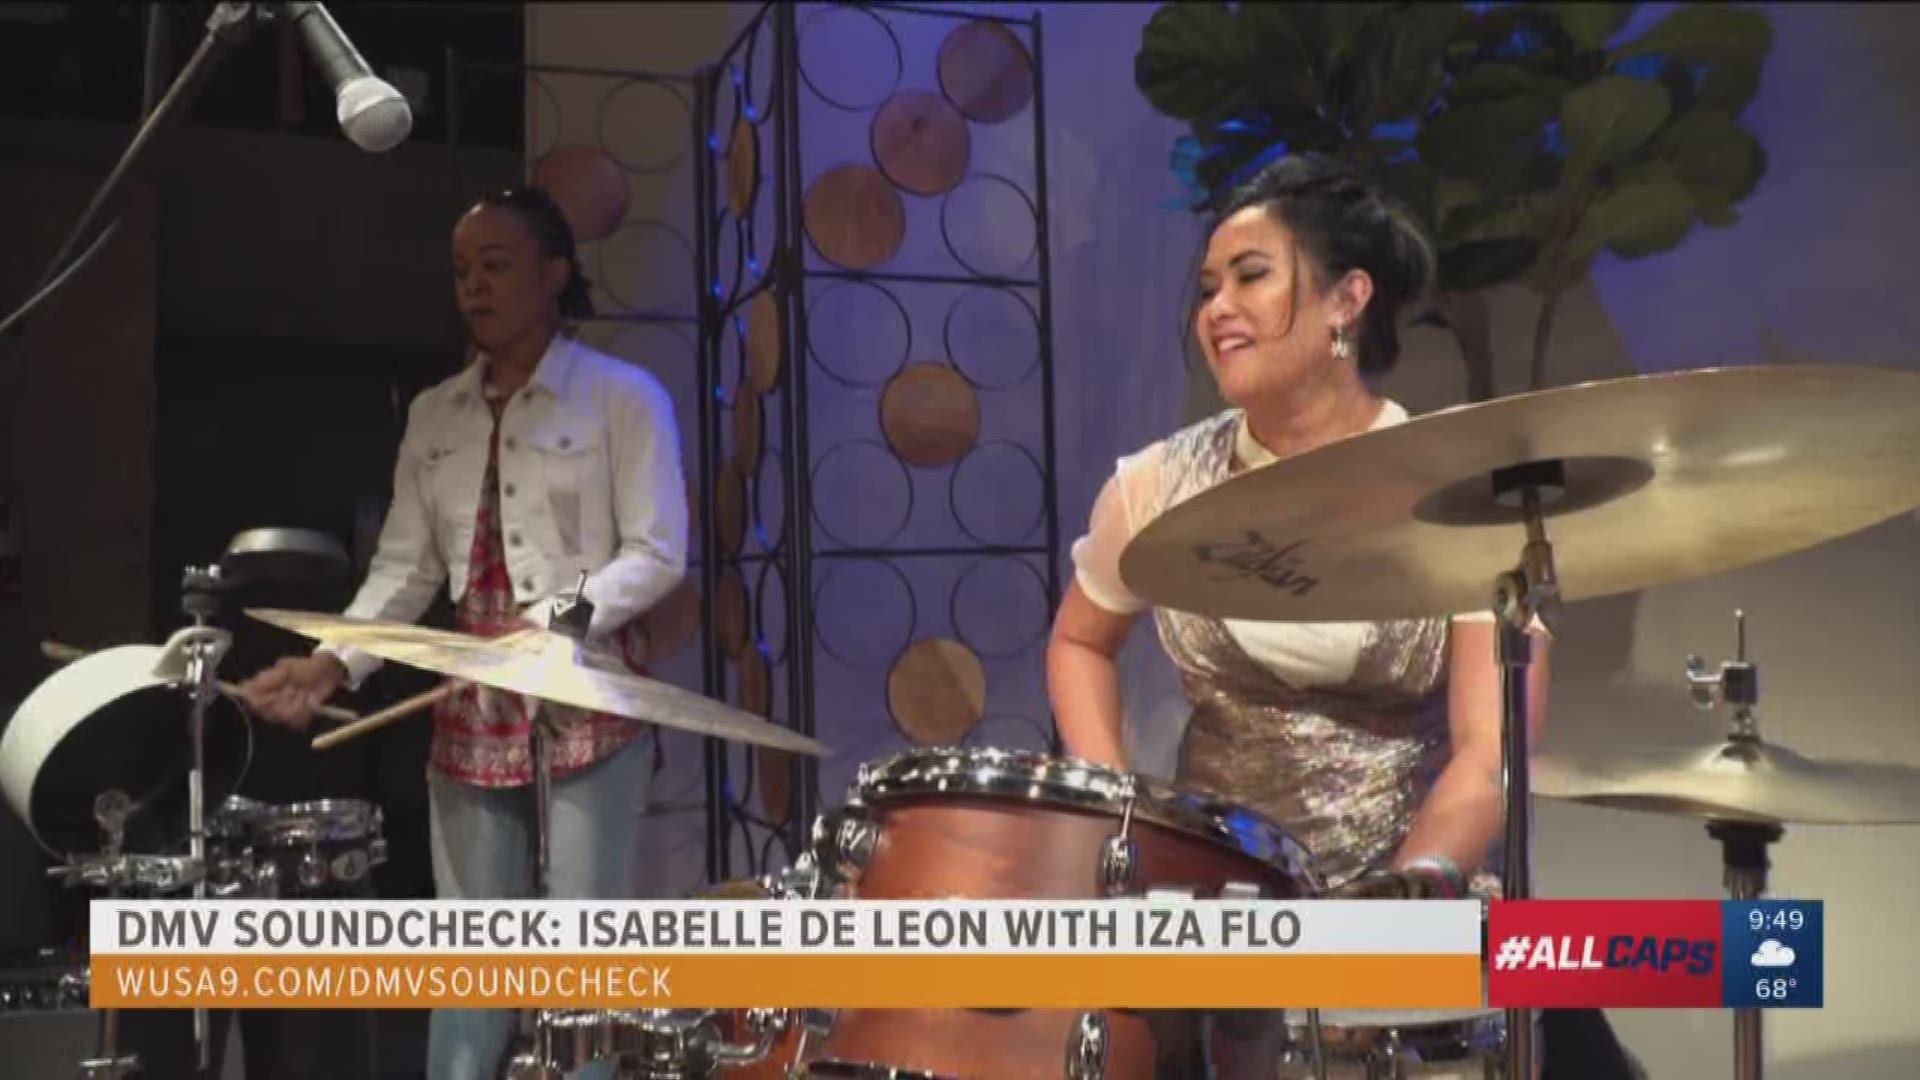 Isabelle De Leon is a professional drummer, songwriter and University of Maryland graduate. She was joined by the band Iza Flo for a live DMV Soundcheck performance.